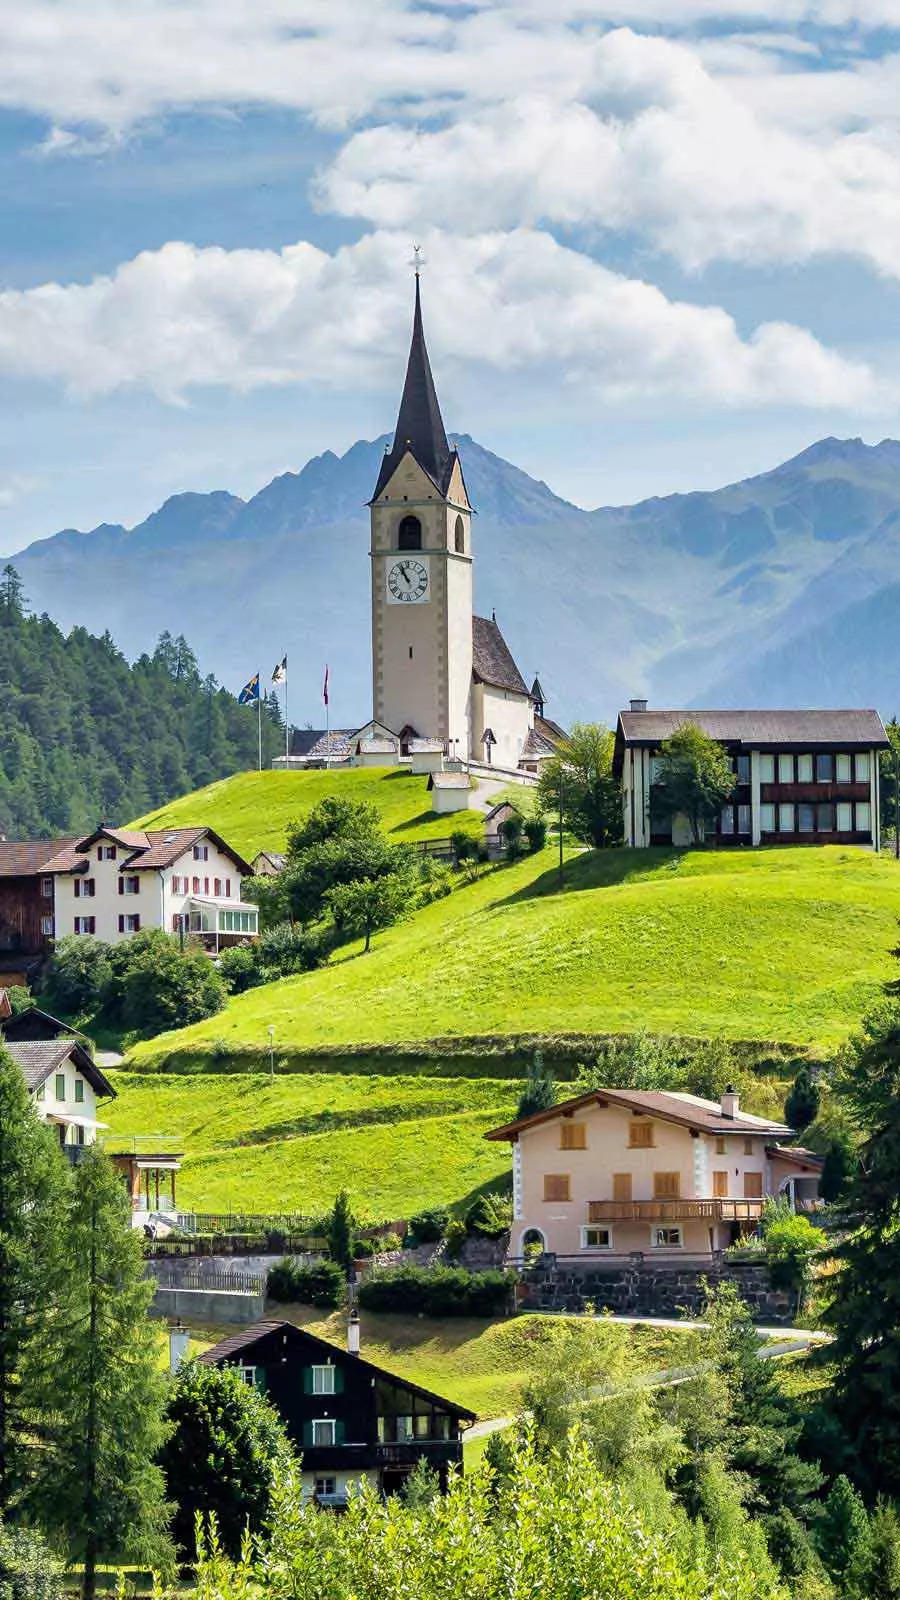 Switzerland: Fully vaccinated travelers not required to present Covid-19 test report before entry